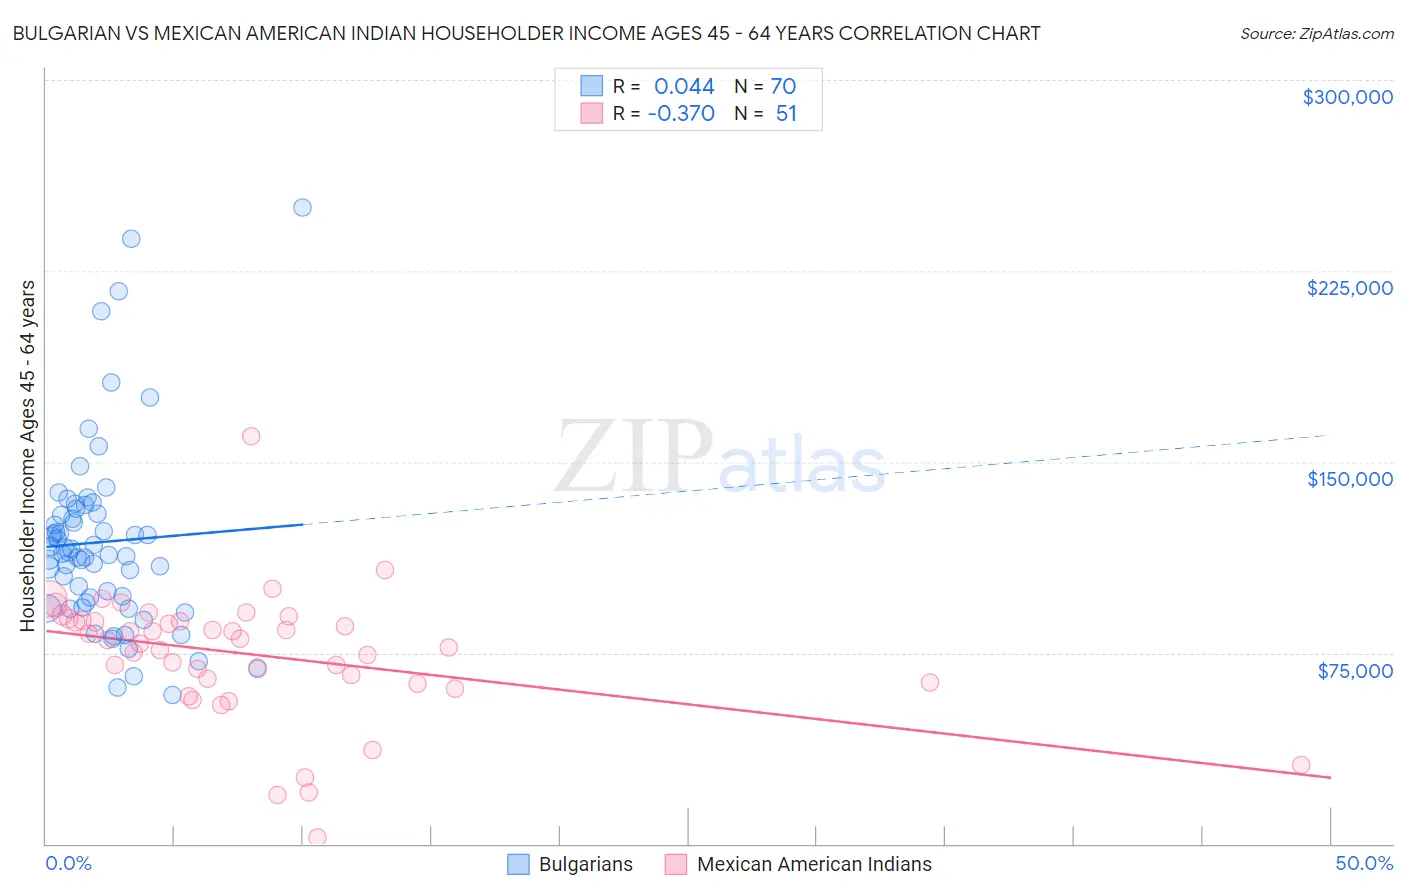 Bulgarian vs Mexican American Indian Householder Income Ages 45 - 64 years